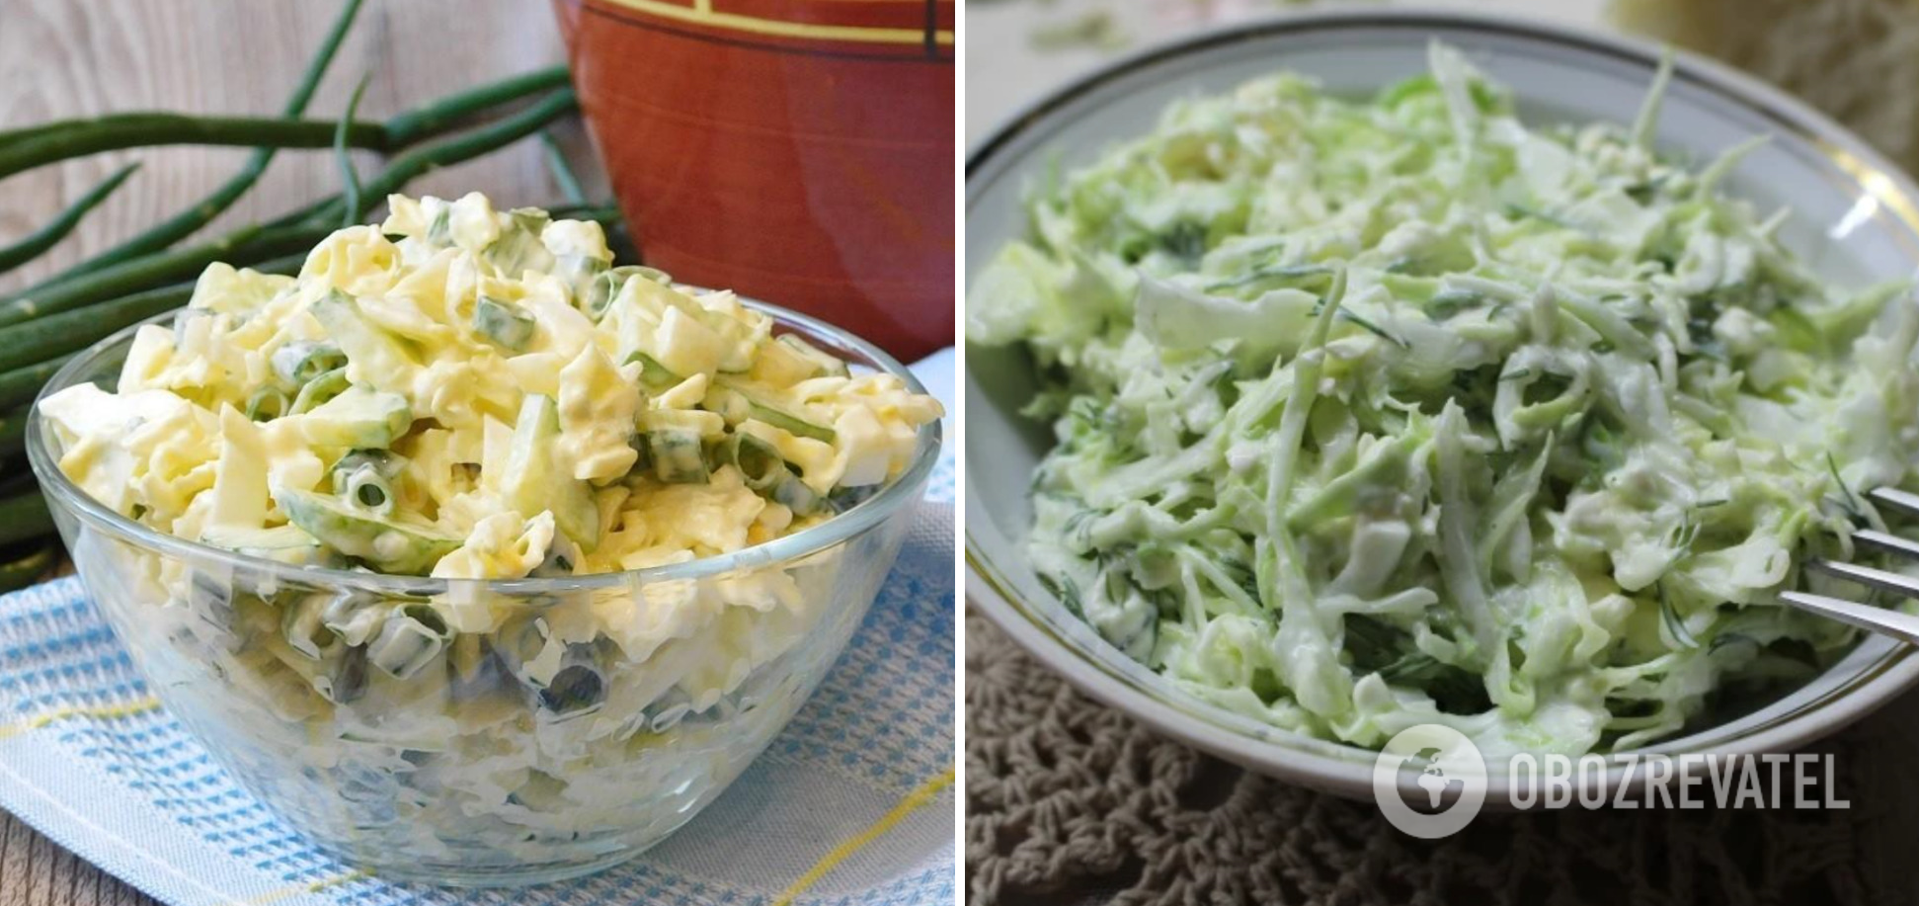 Cabbage salad with mayonnaise